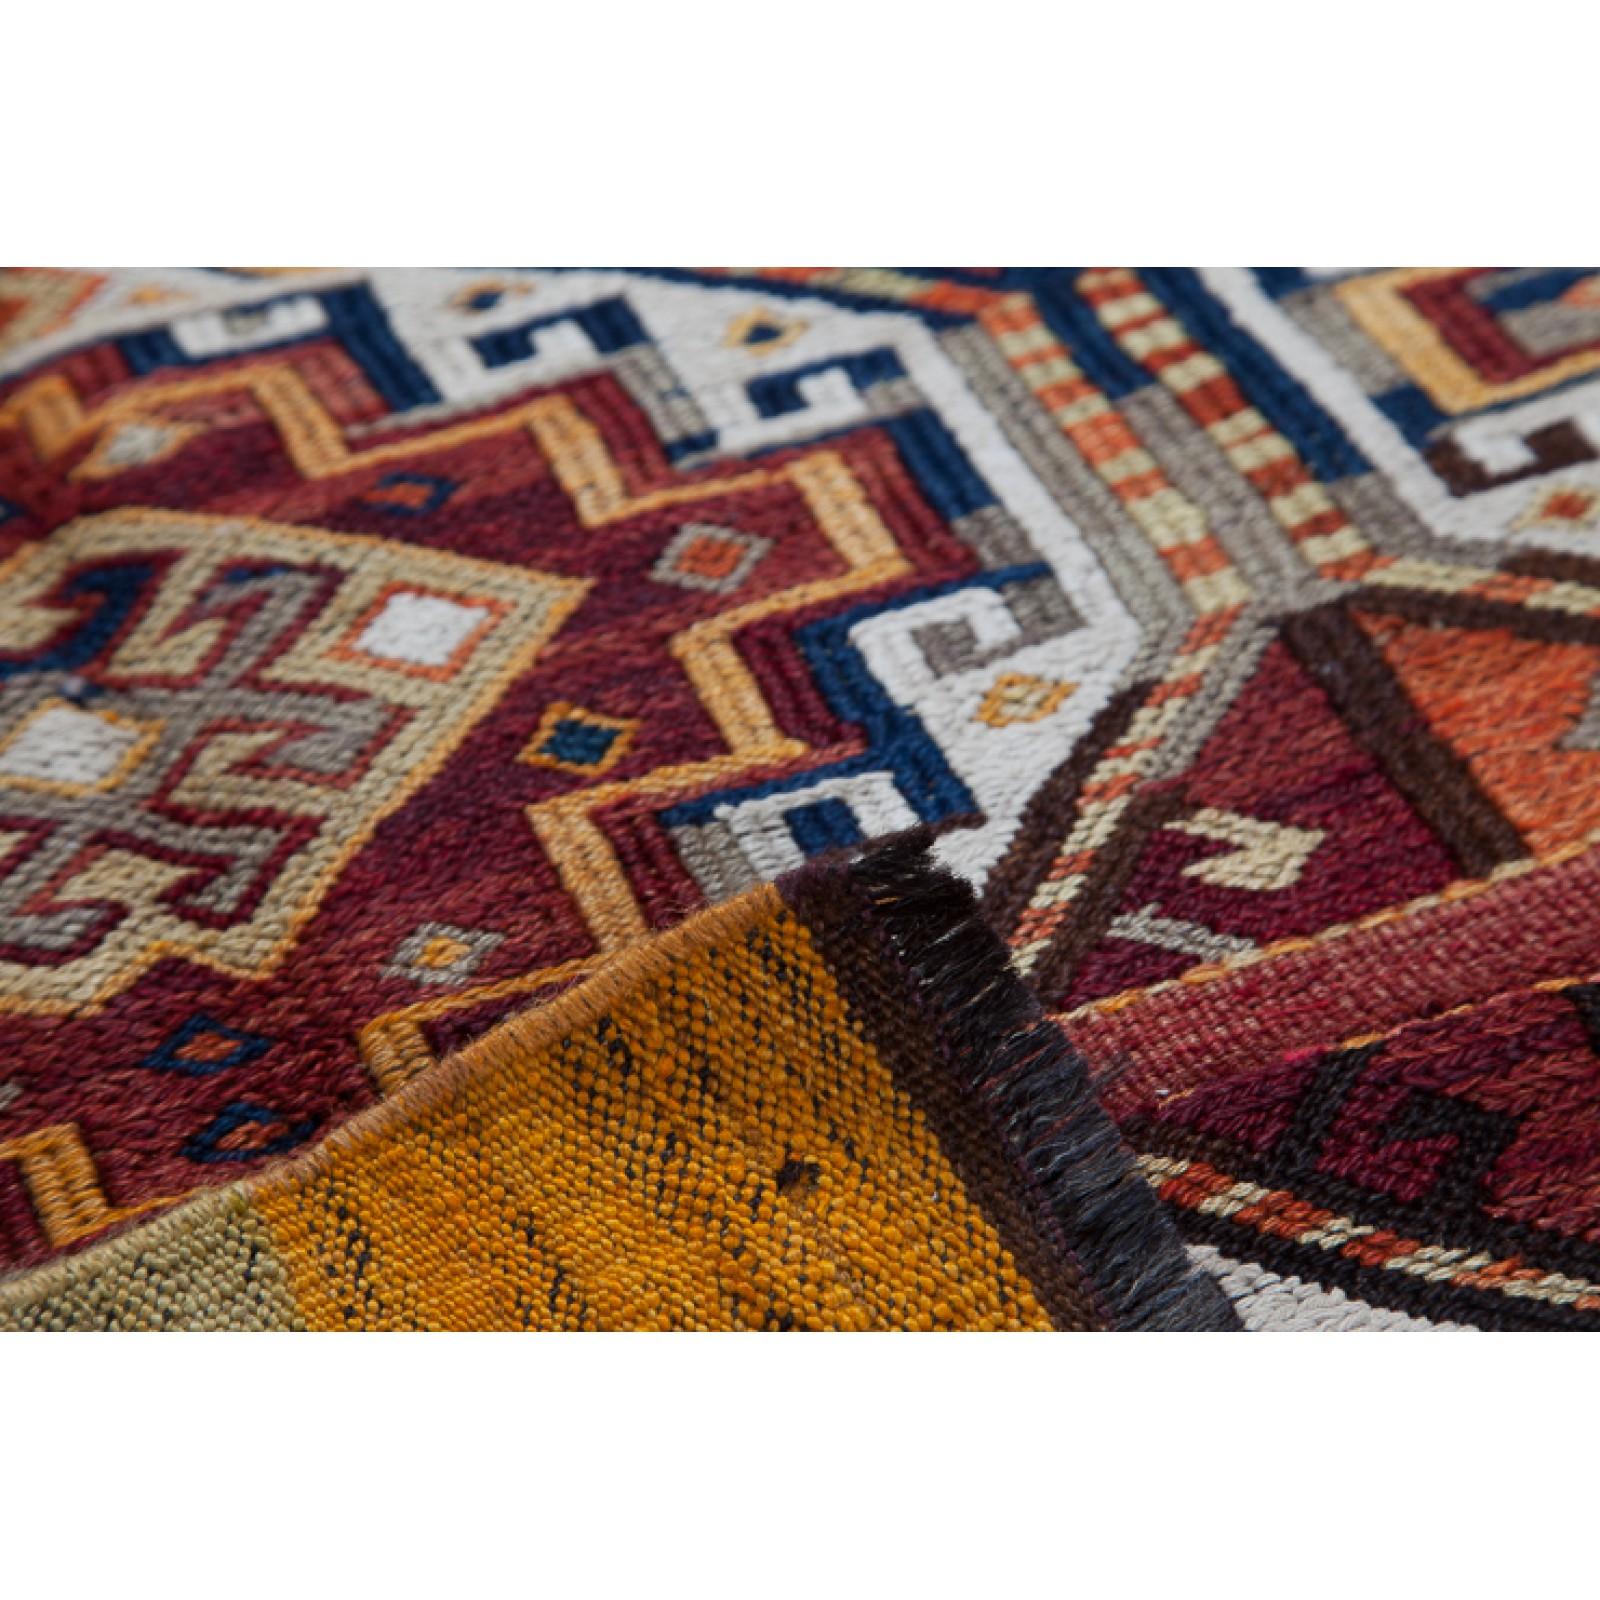 This is Eastern Anatolian Vintage Chuval Kilim from the Malatya region with wool & Goat hair threads and a rare, beautiful color composition.

This highly collectible antique kilim has wonderful special colors and textures that are typical of an old